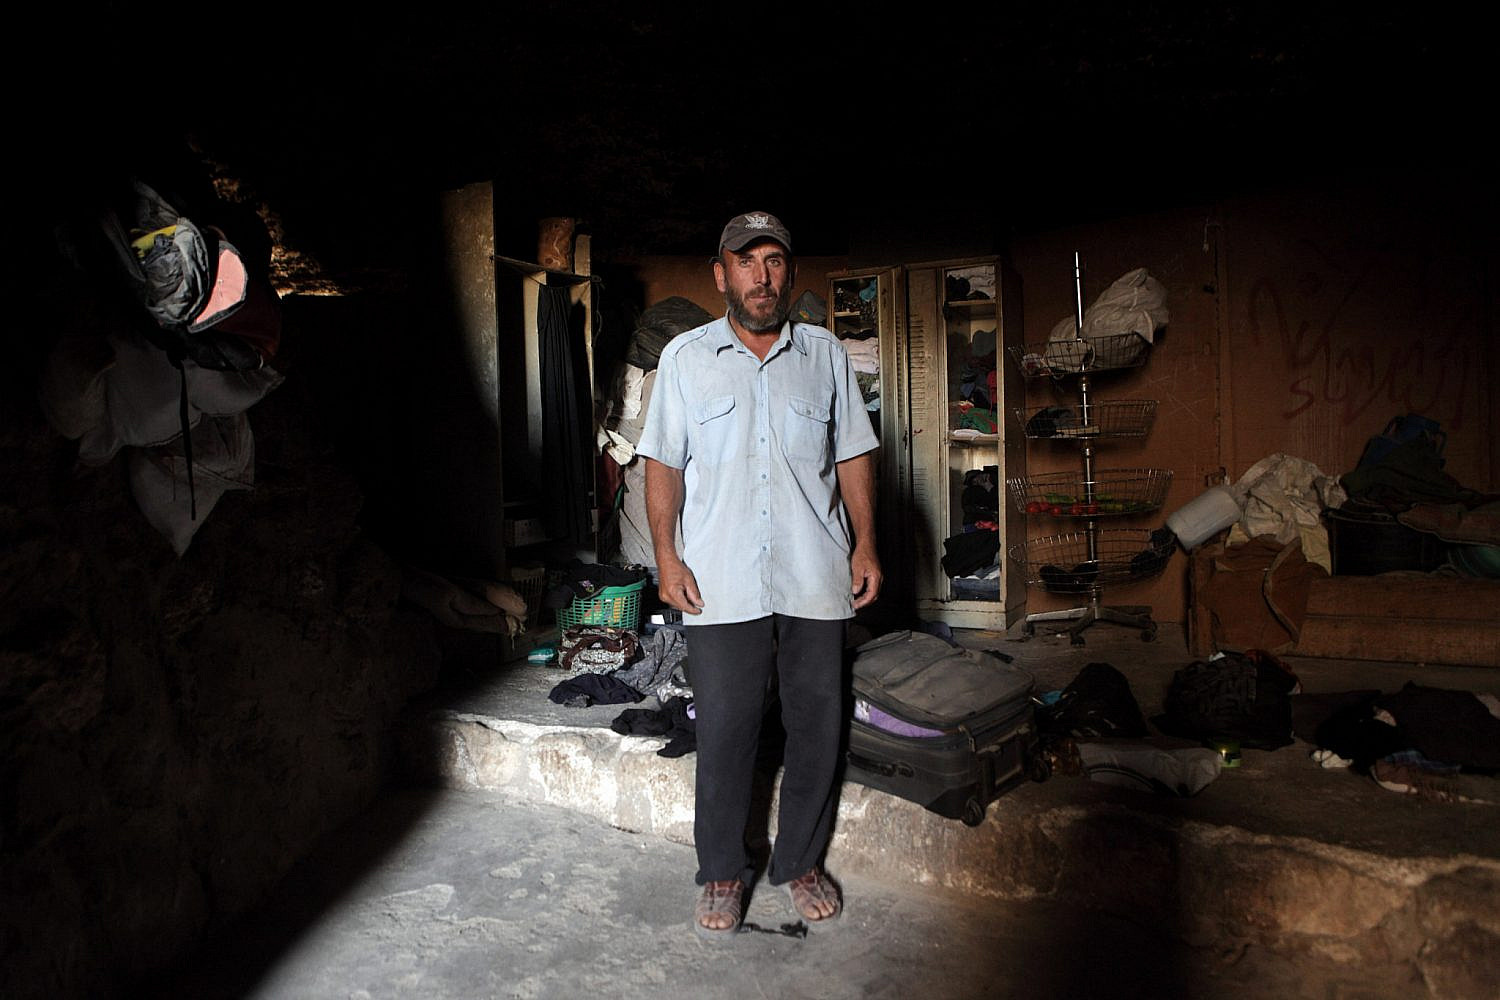 Mohammad Youssef Abu Arham, father of four children, stands in his residential cave inside the West Bank village of Jinba, located in the South Hebron Hills, September 6, 2012. (Anne Paq/Activestills)